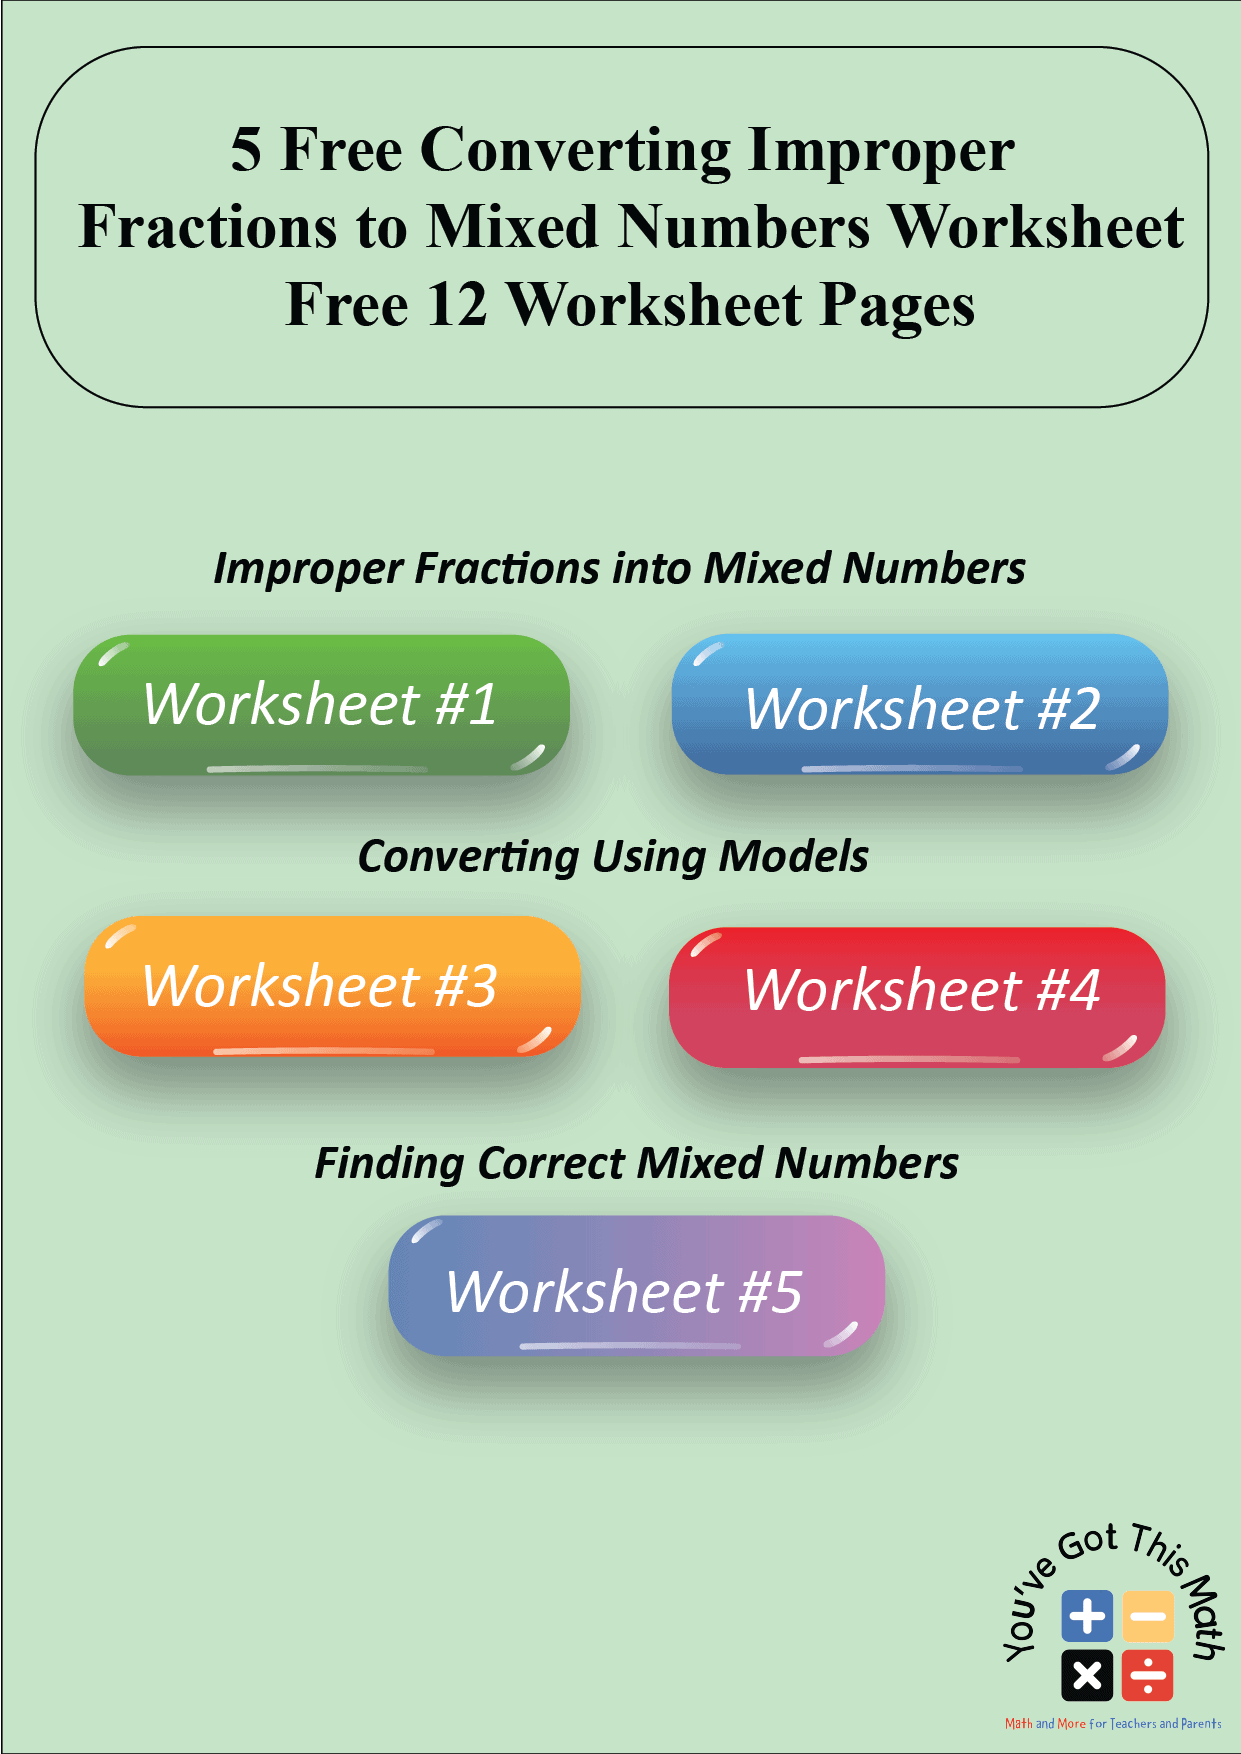 Converting Improper Fractions to Mixed Numbers Worksheet